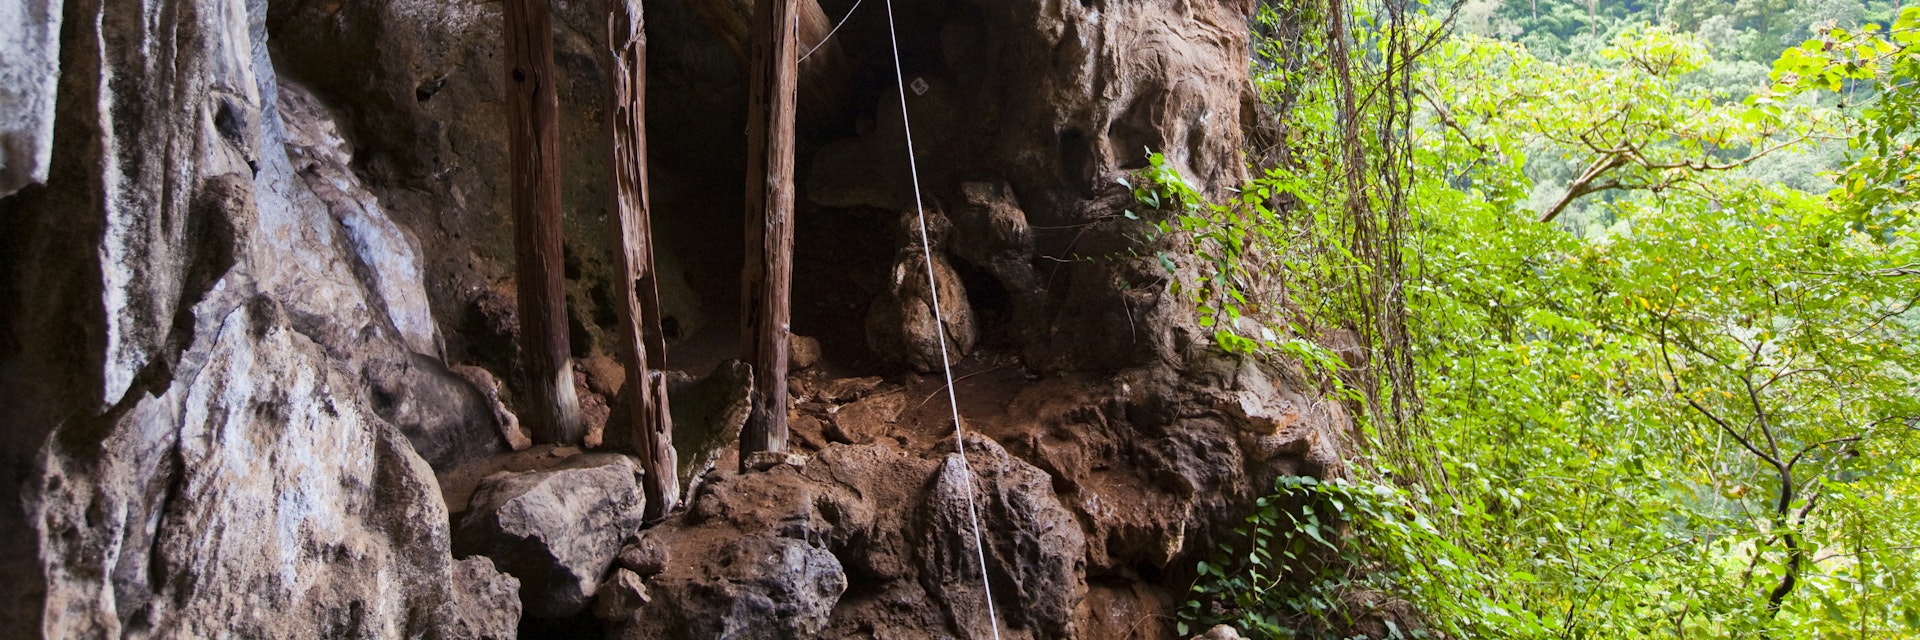 Coffin Cave near Mae Hong Son, where human remains have been found suspended in burial.